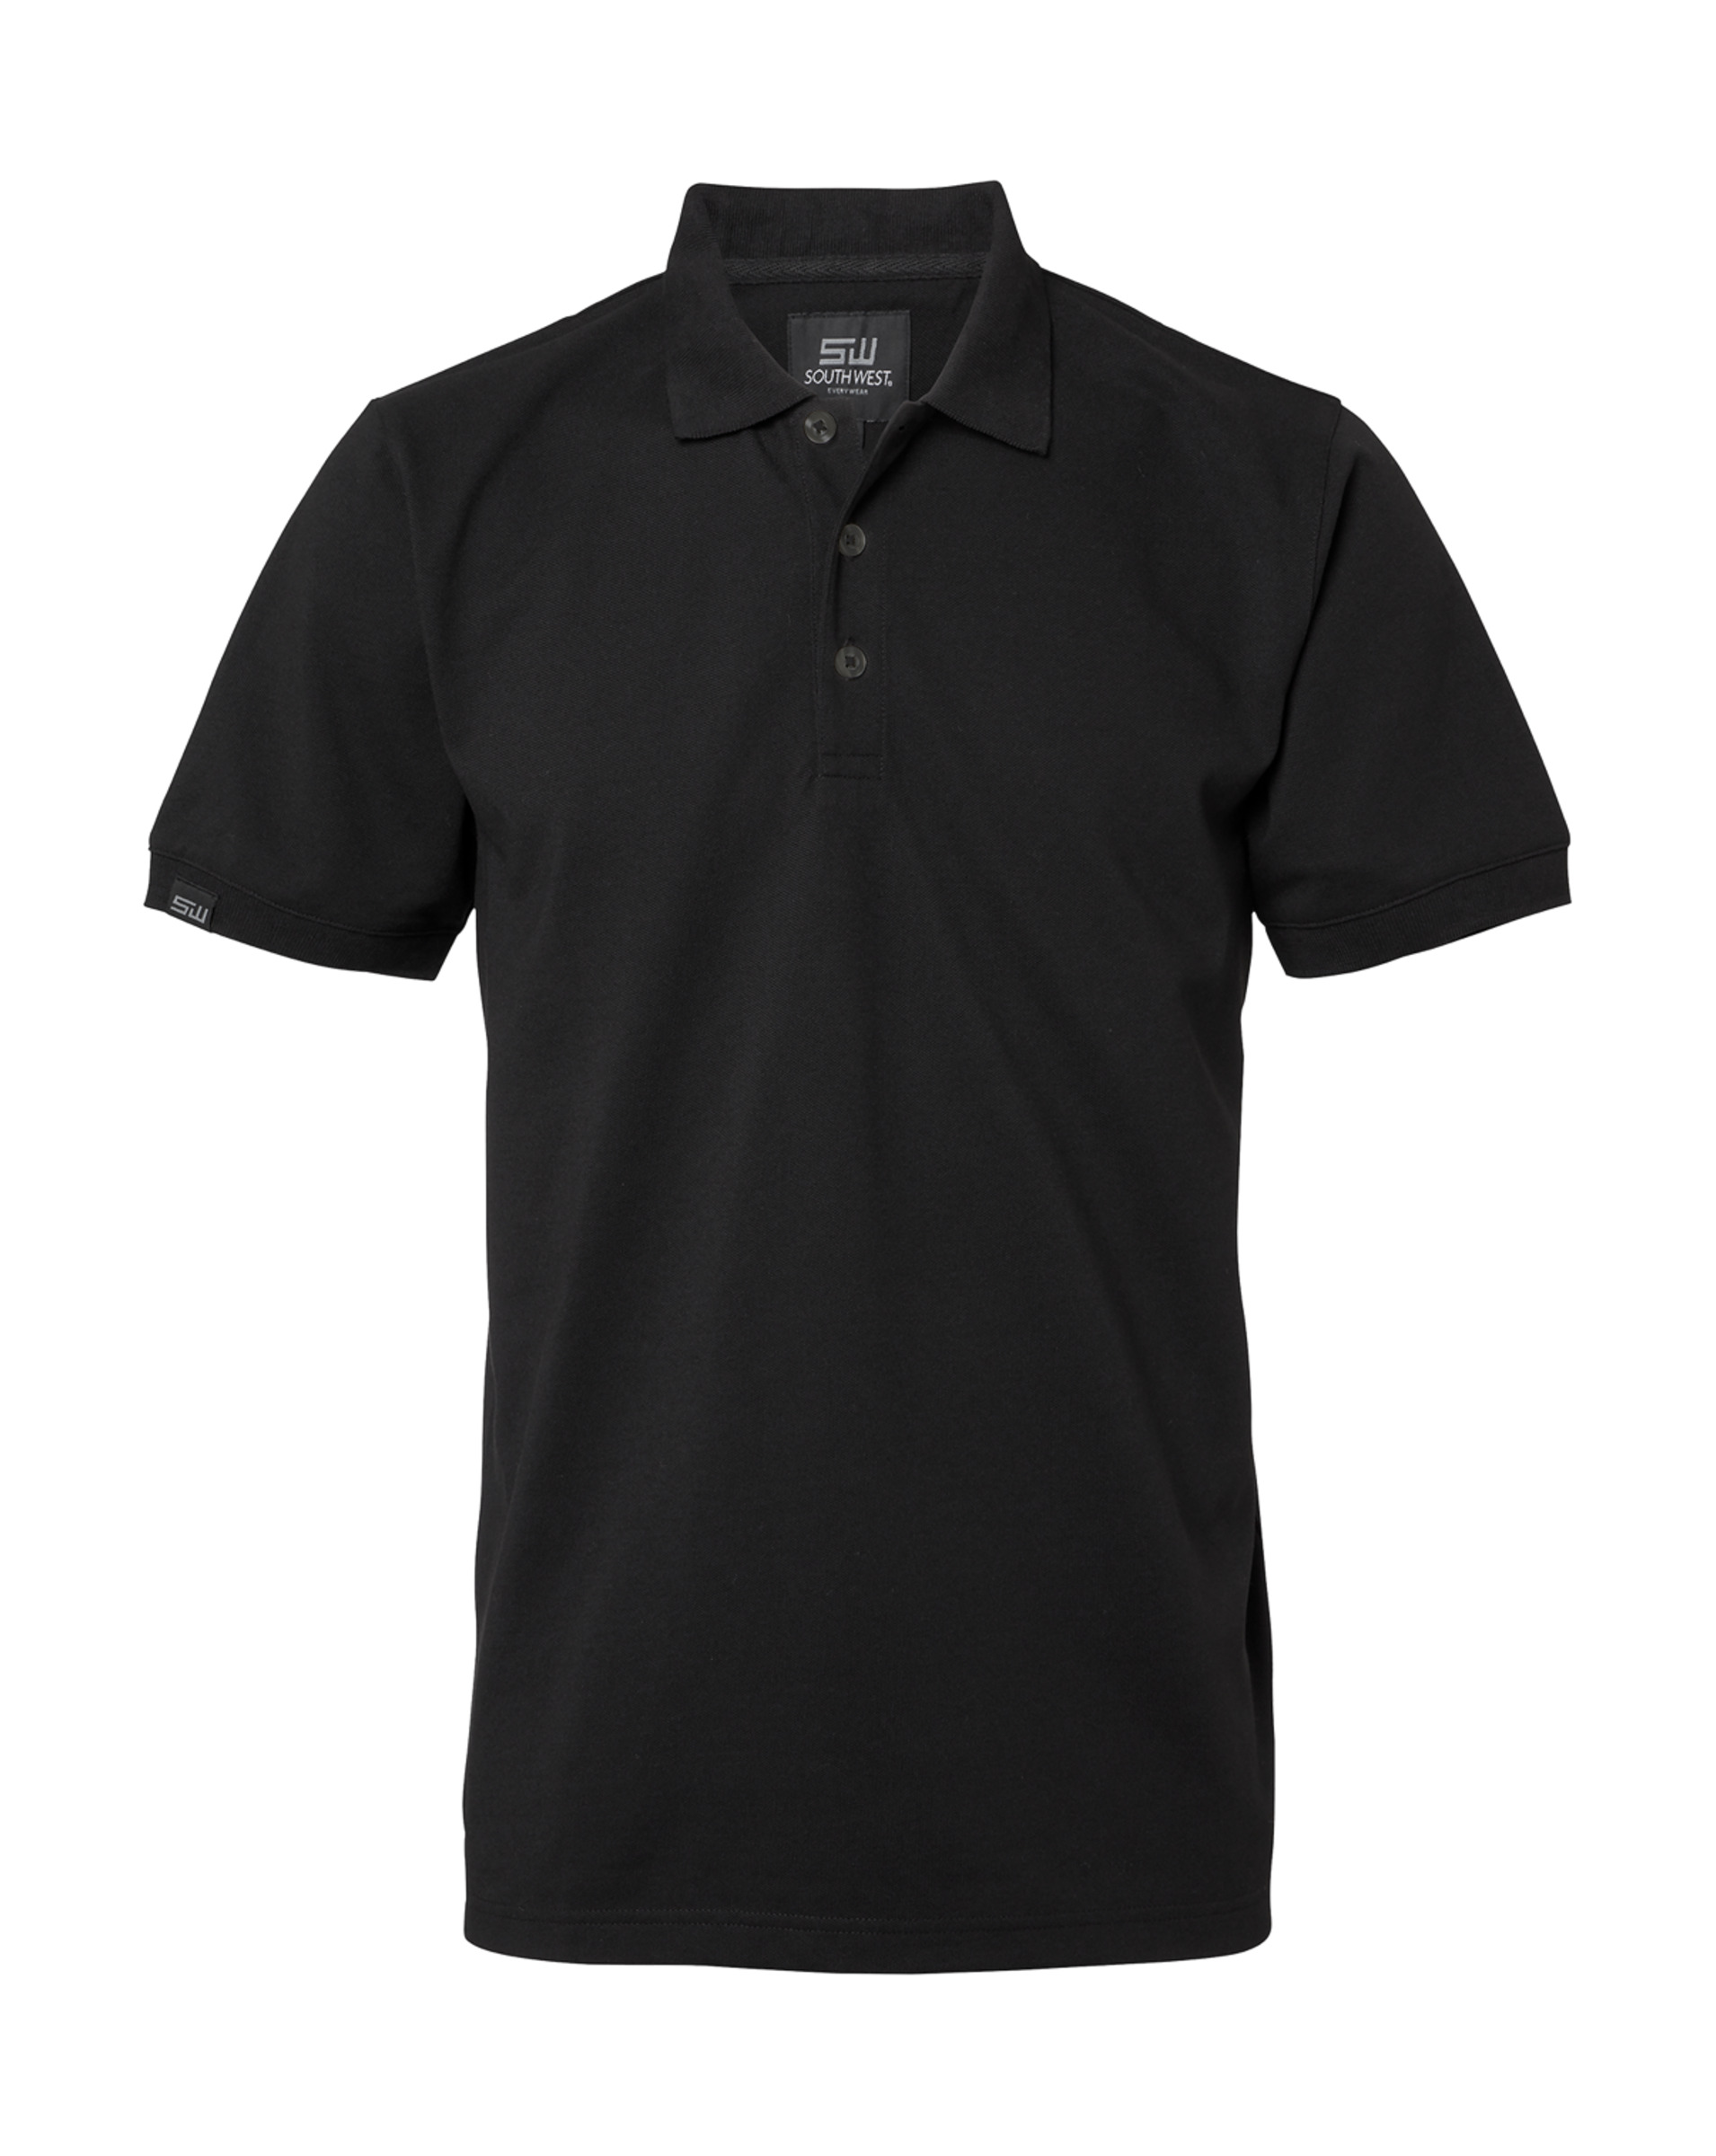 South West Weston solid Polo